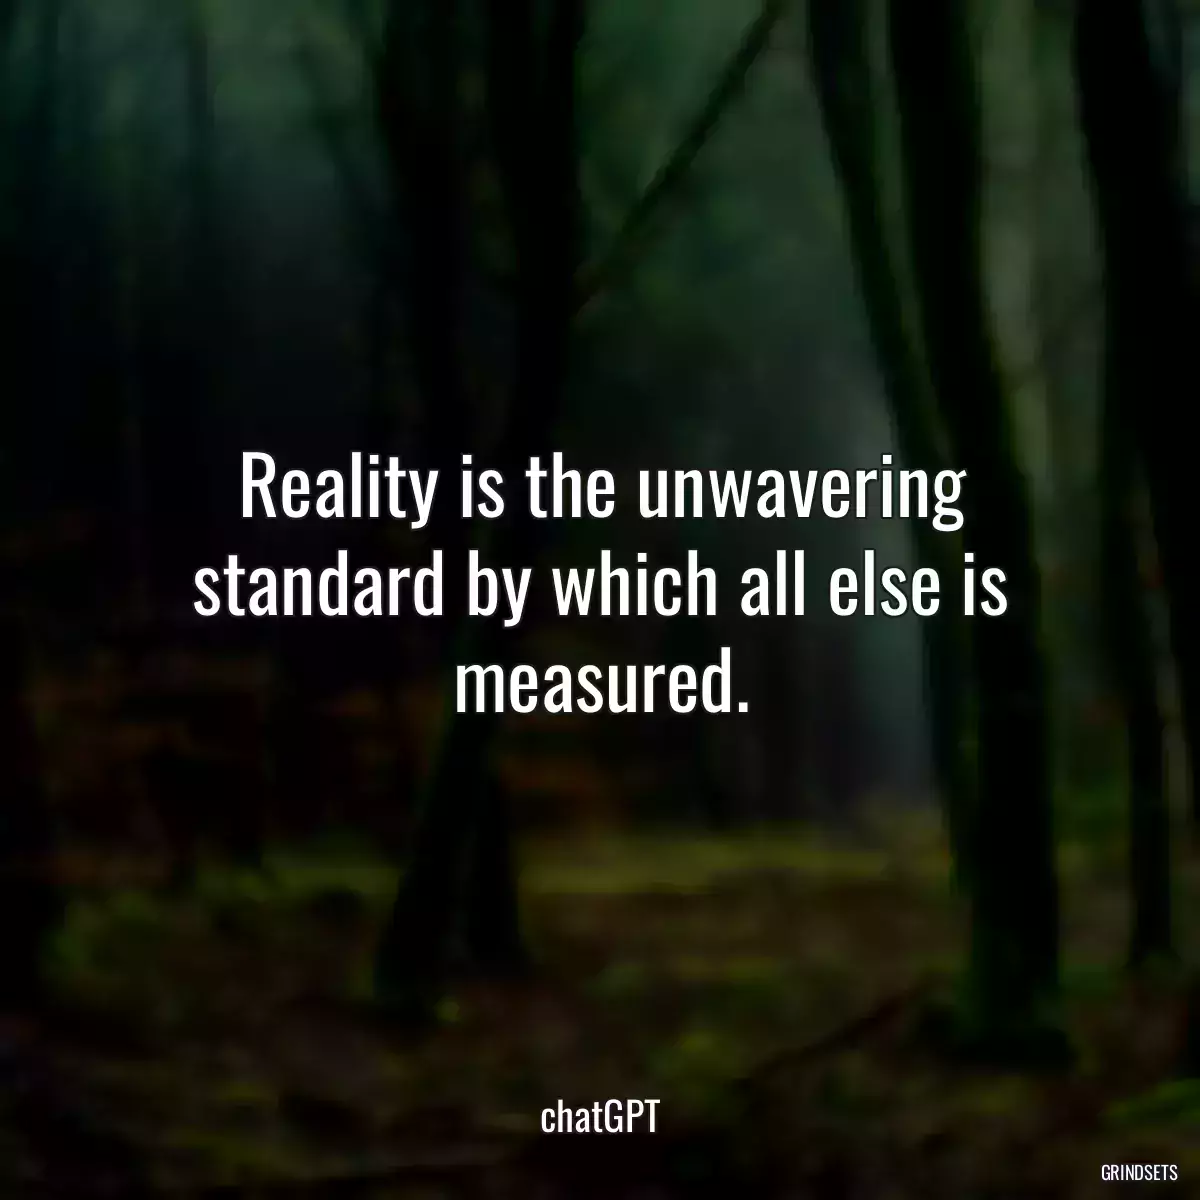 Reality is the unwavering standard by which all else is measured.